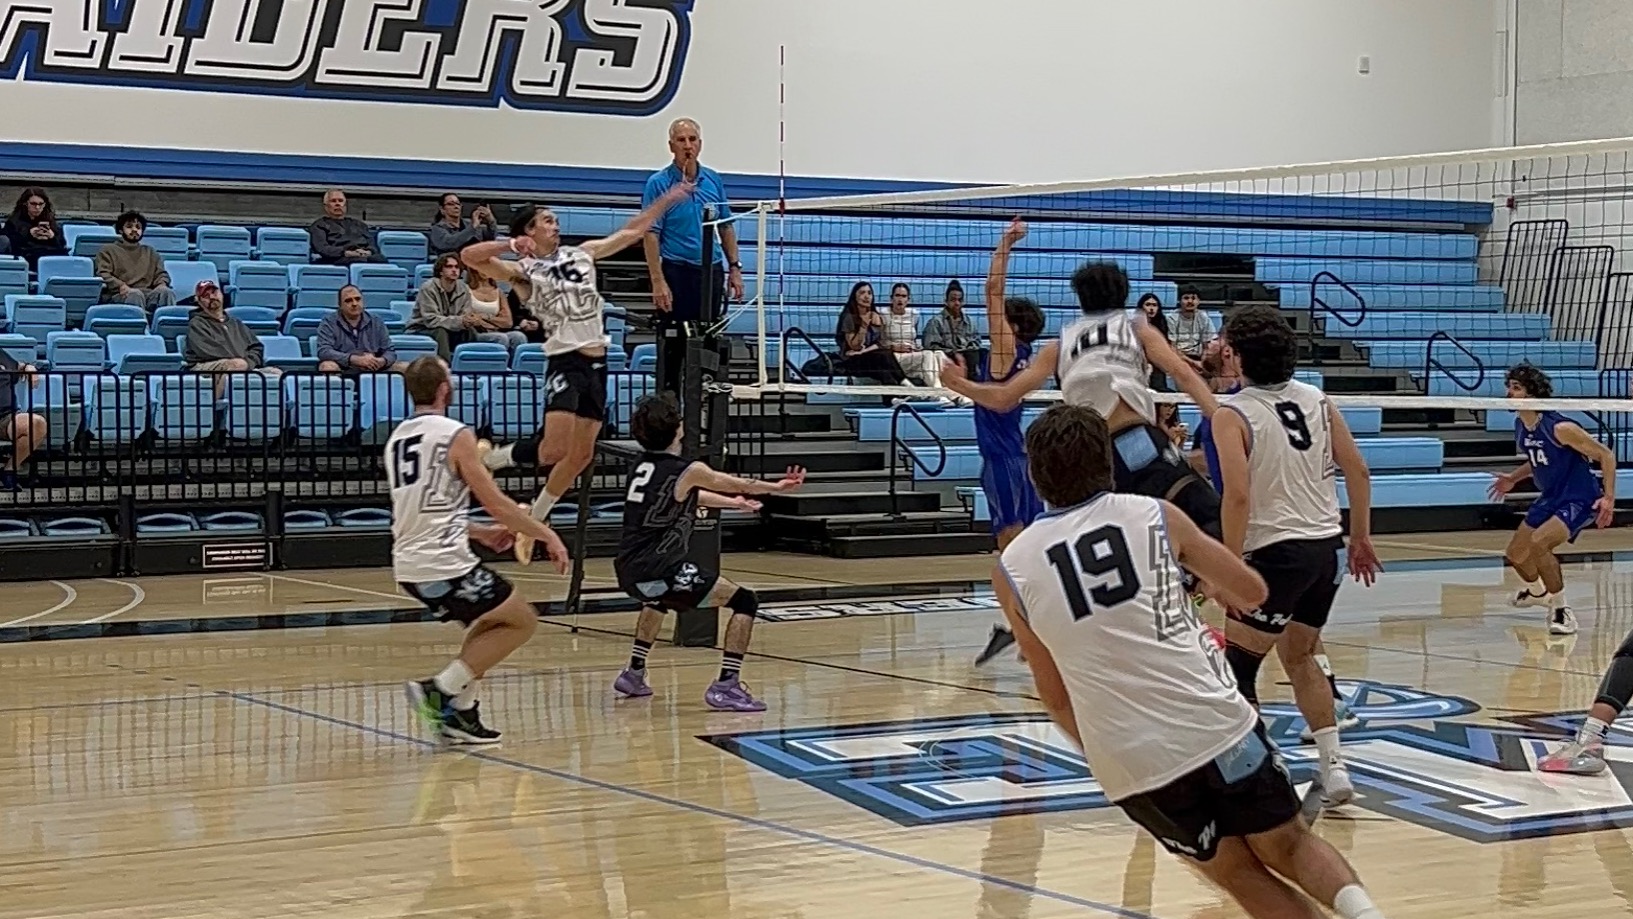 Men's Volleyball takes out Irvine Valley in 4 games